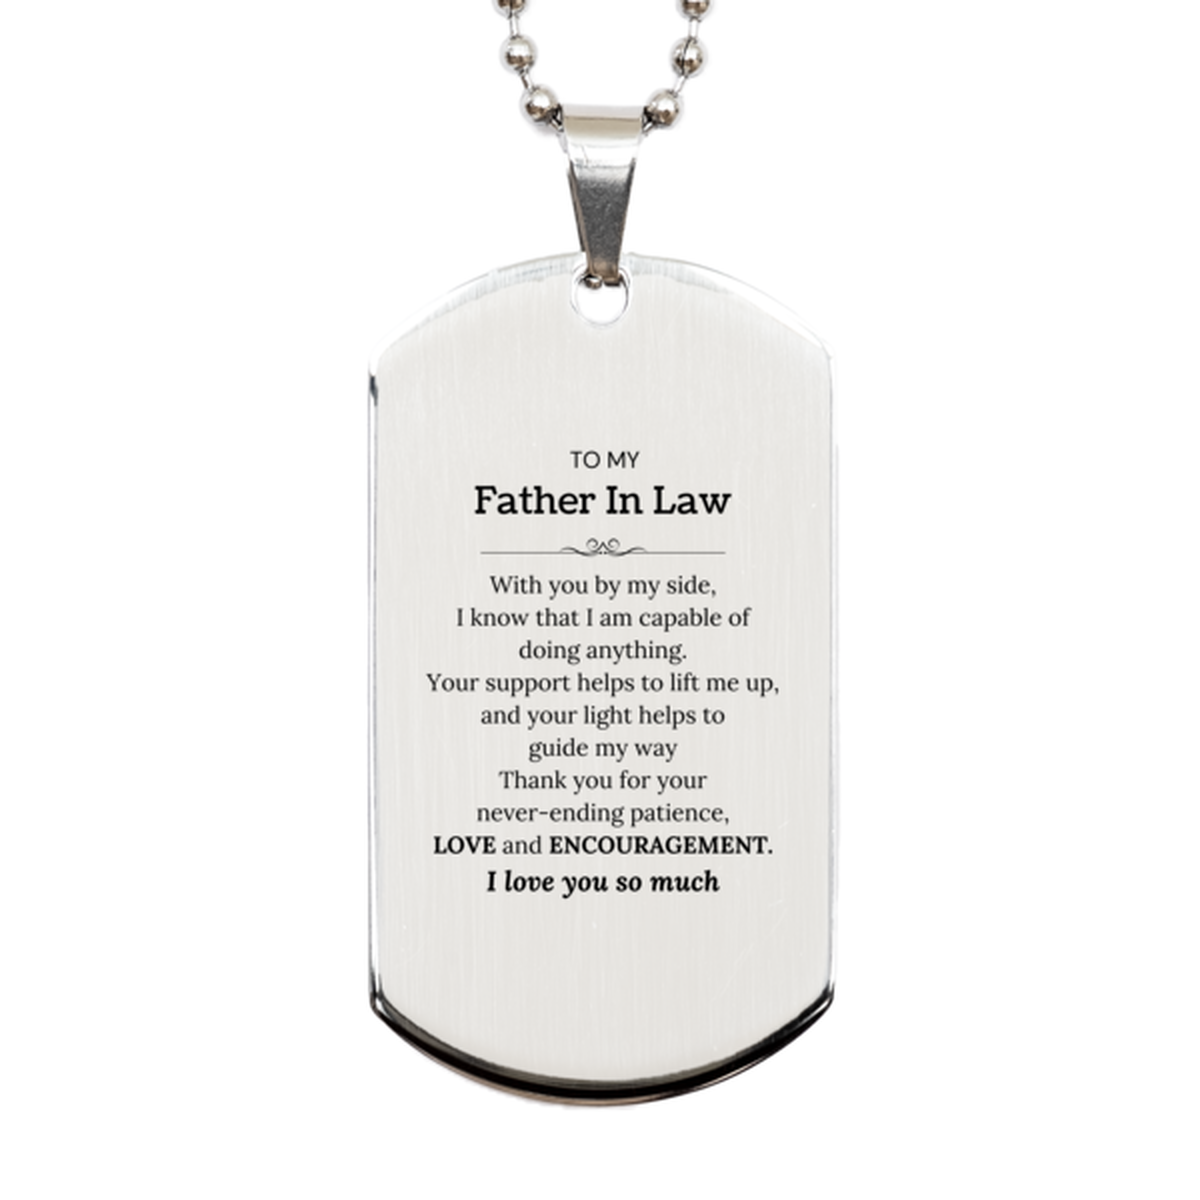 Appreciation Father In Law Silver Dog Tag Gifts, To My Father In Law Birthday Christmas Wedding Keepsake Gifts for Father In Law With you by my side, I know that I am capable of doing anything. I love you so much